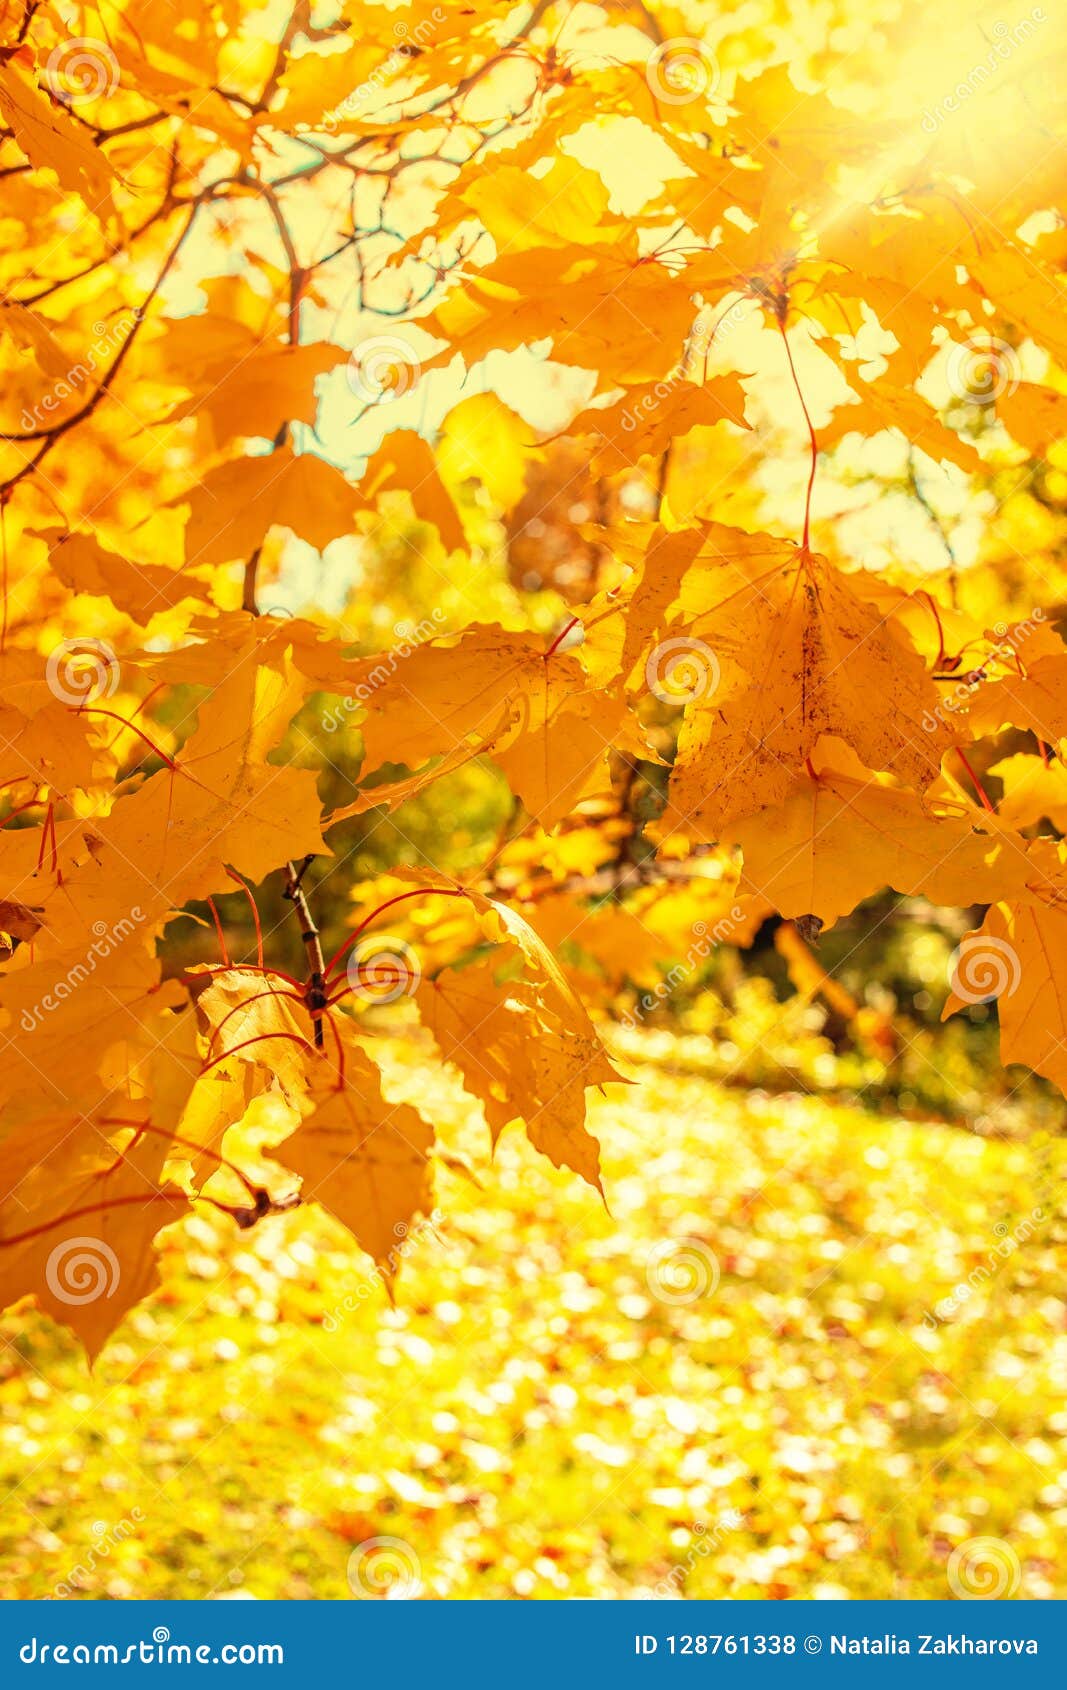 Autumn Fall Scene With Falling Leaves Beautiful Autumnal Park Stock